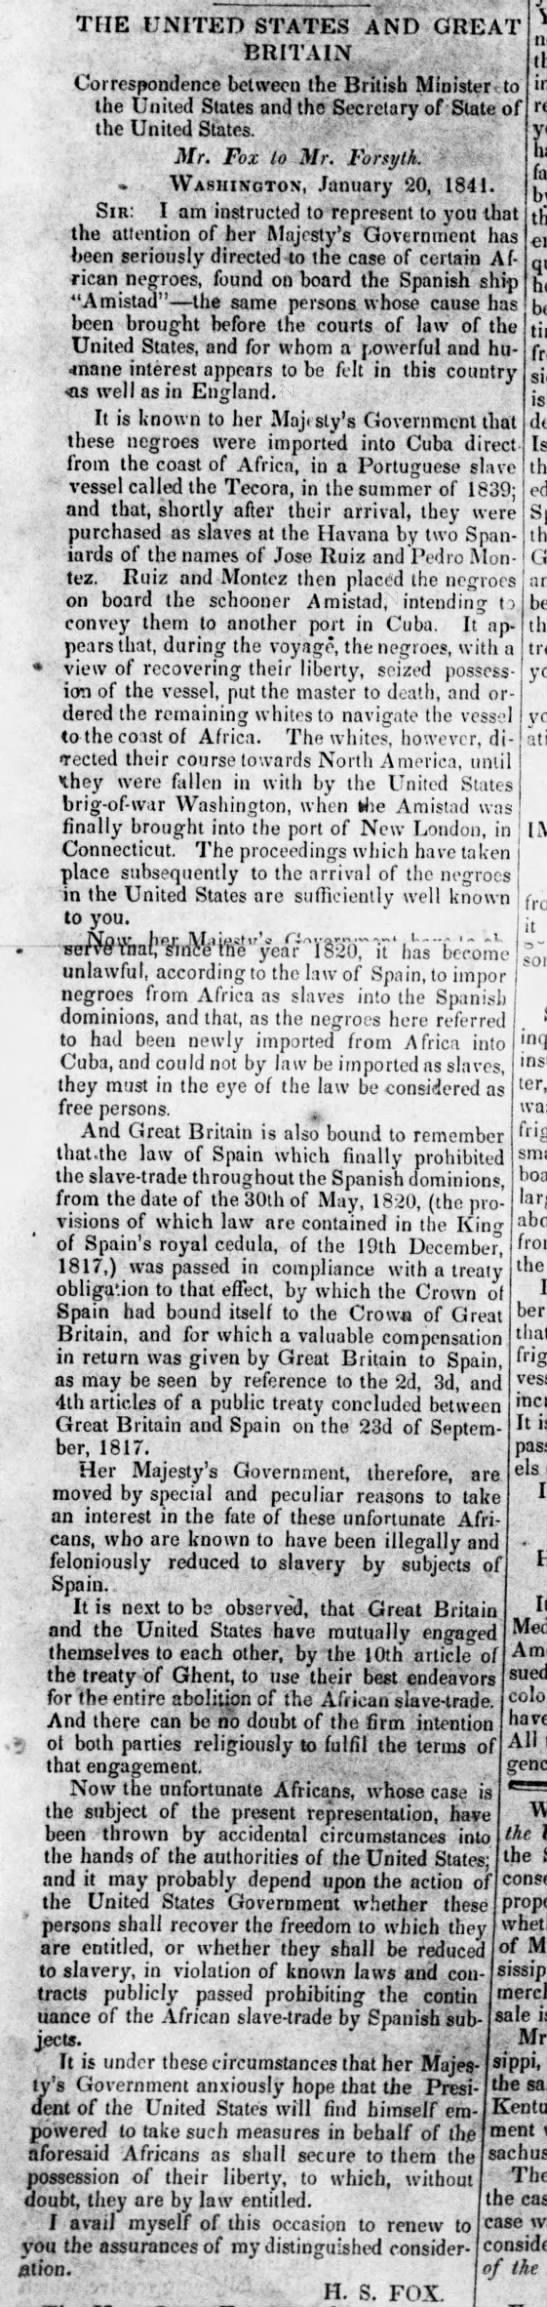 Letter showing the British government's position on the Amistad case - 